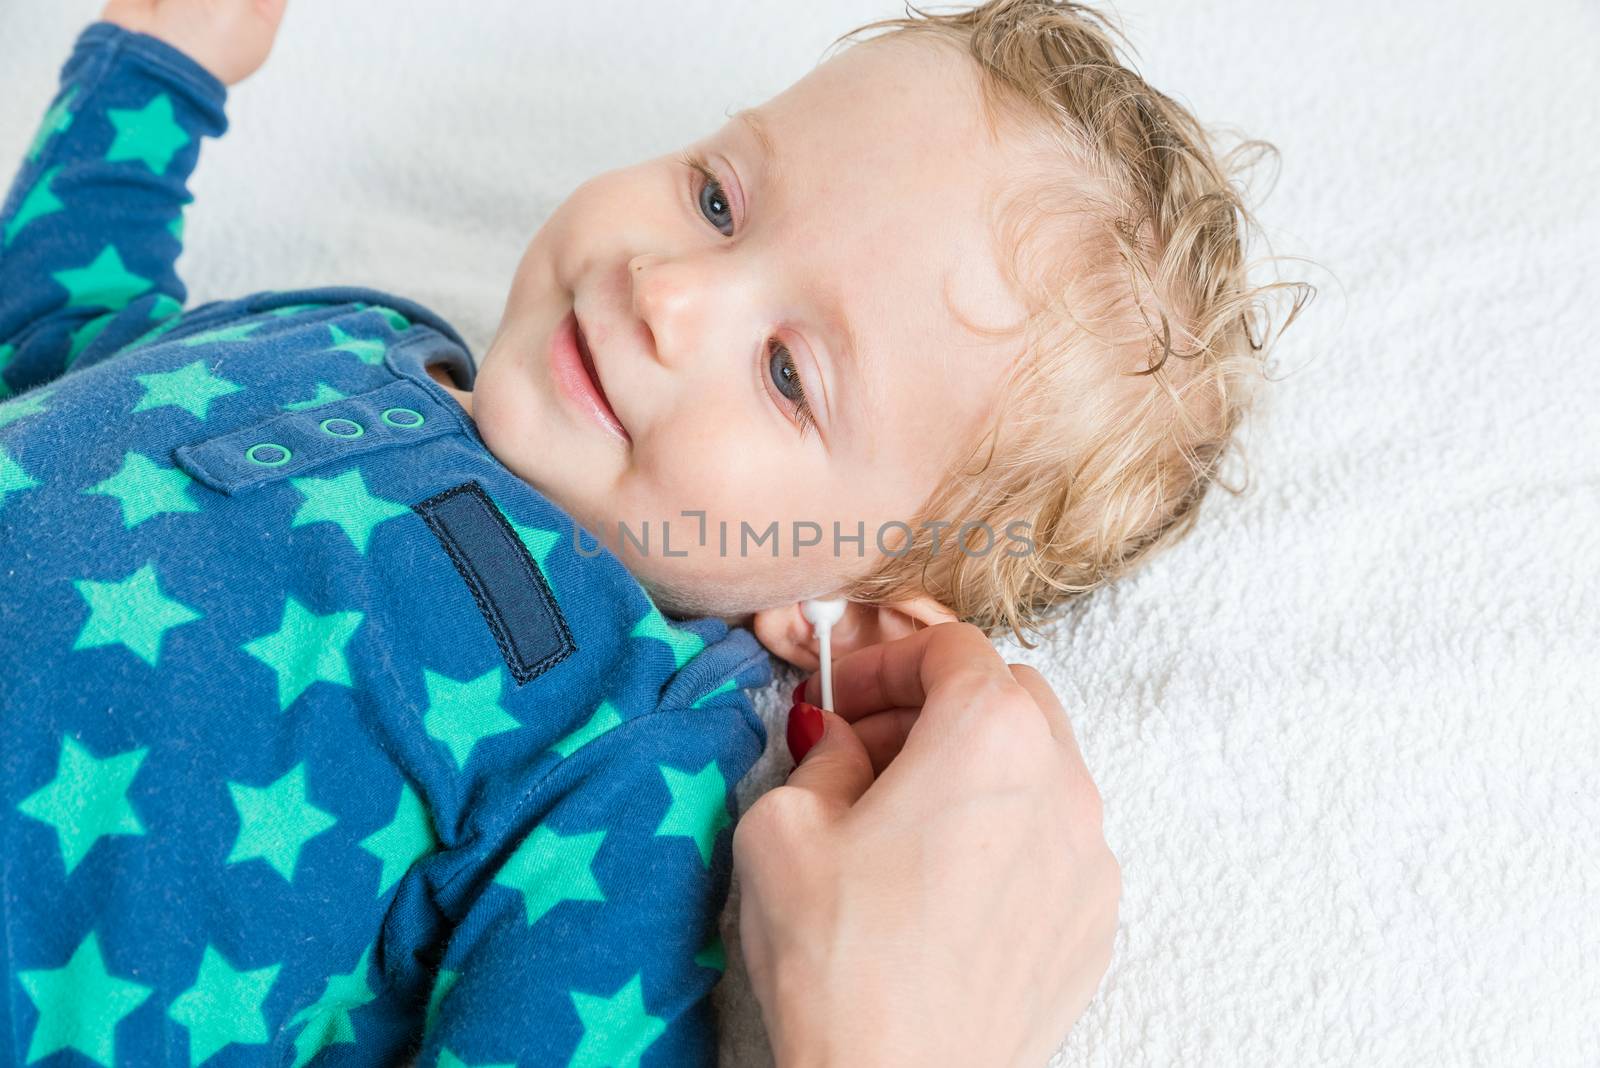 Mother hand cleaning baby ear with cotton swab,infant lying with wet hair and blue eyes and smiling,copy space,horizontal photo.